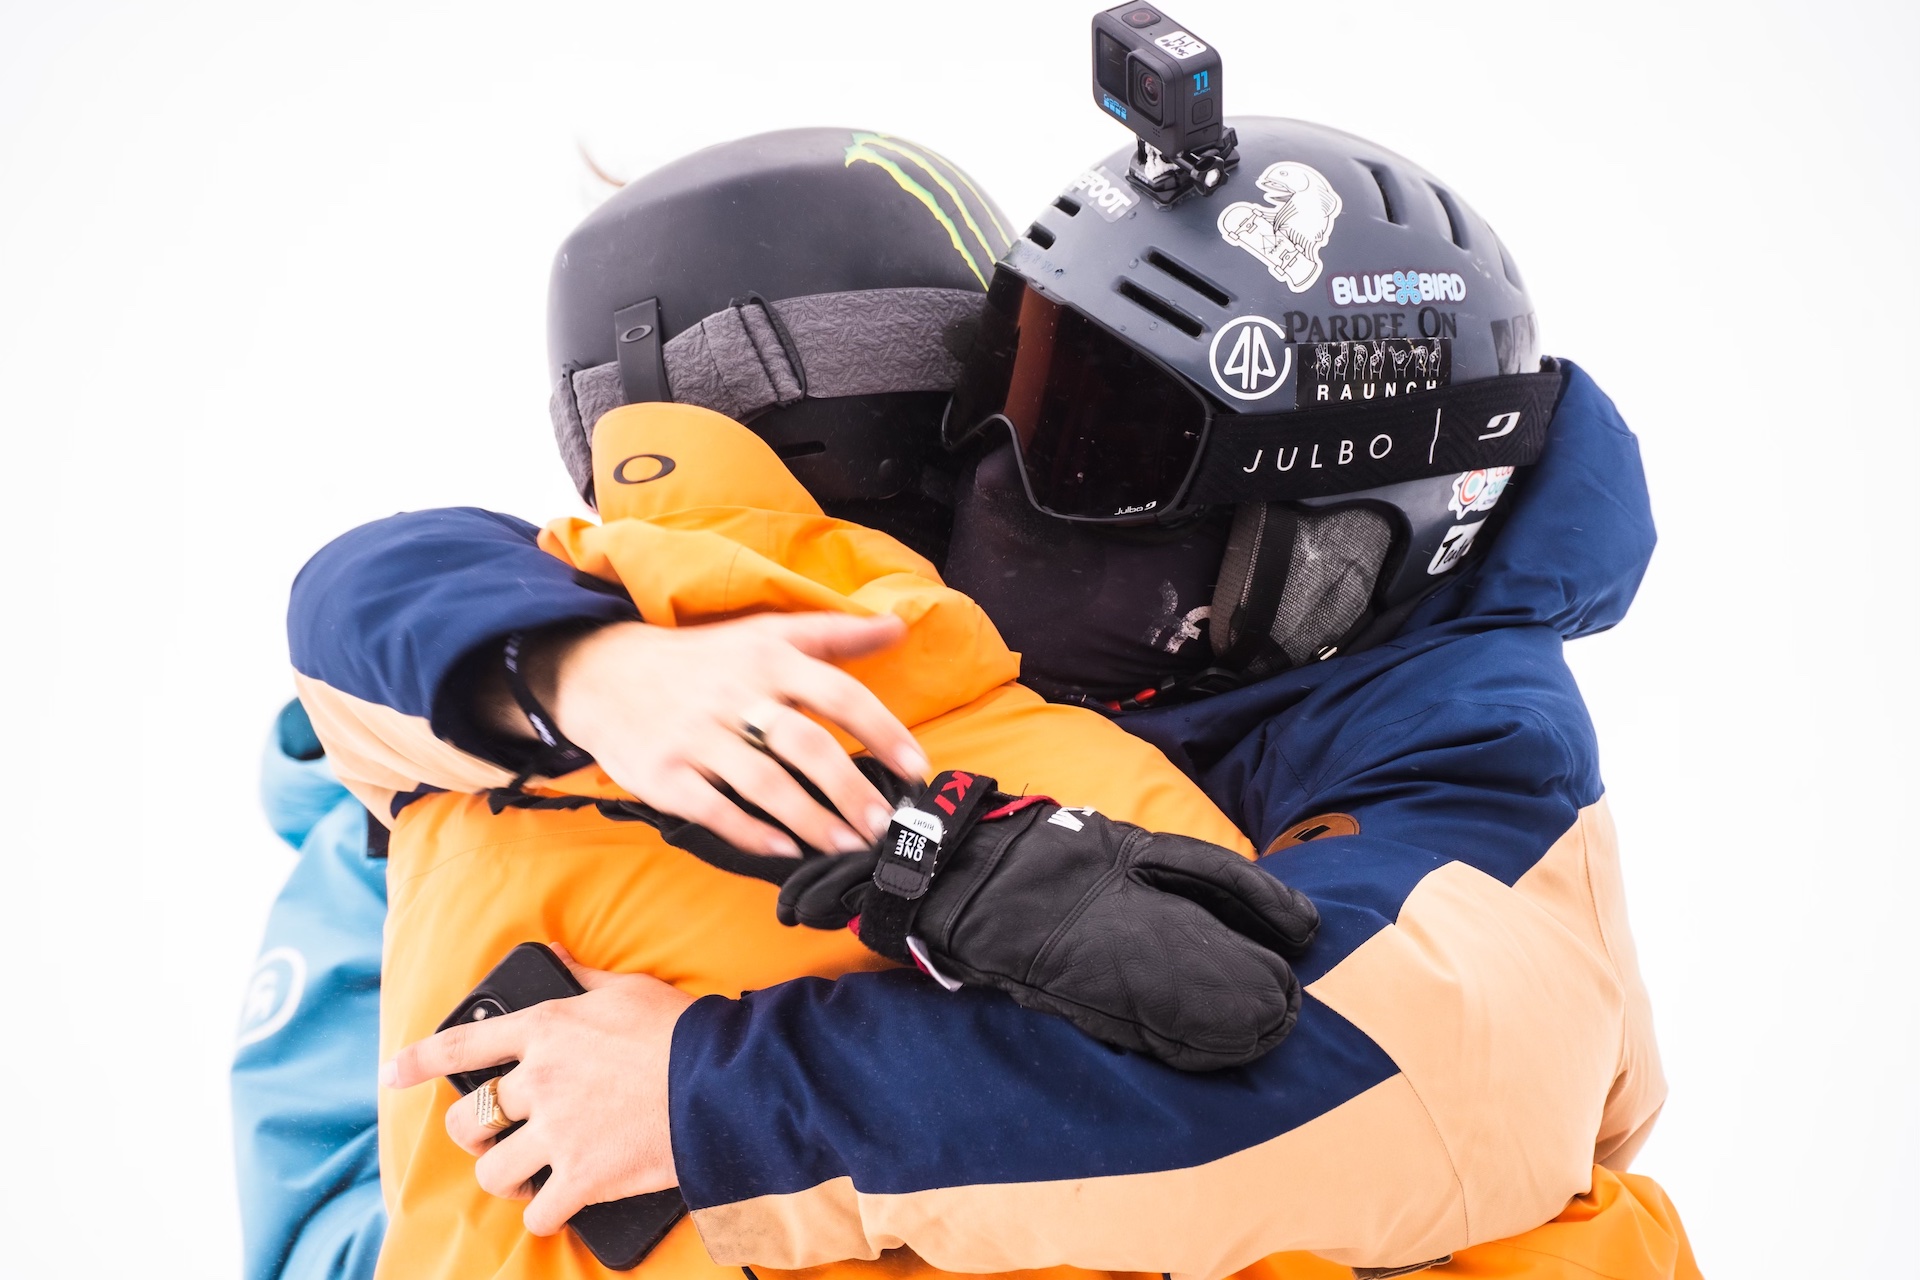 Colby hugging fellow competitor after landing run